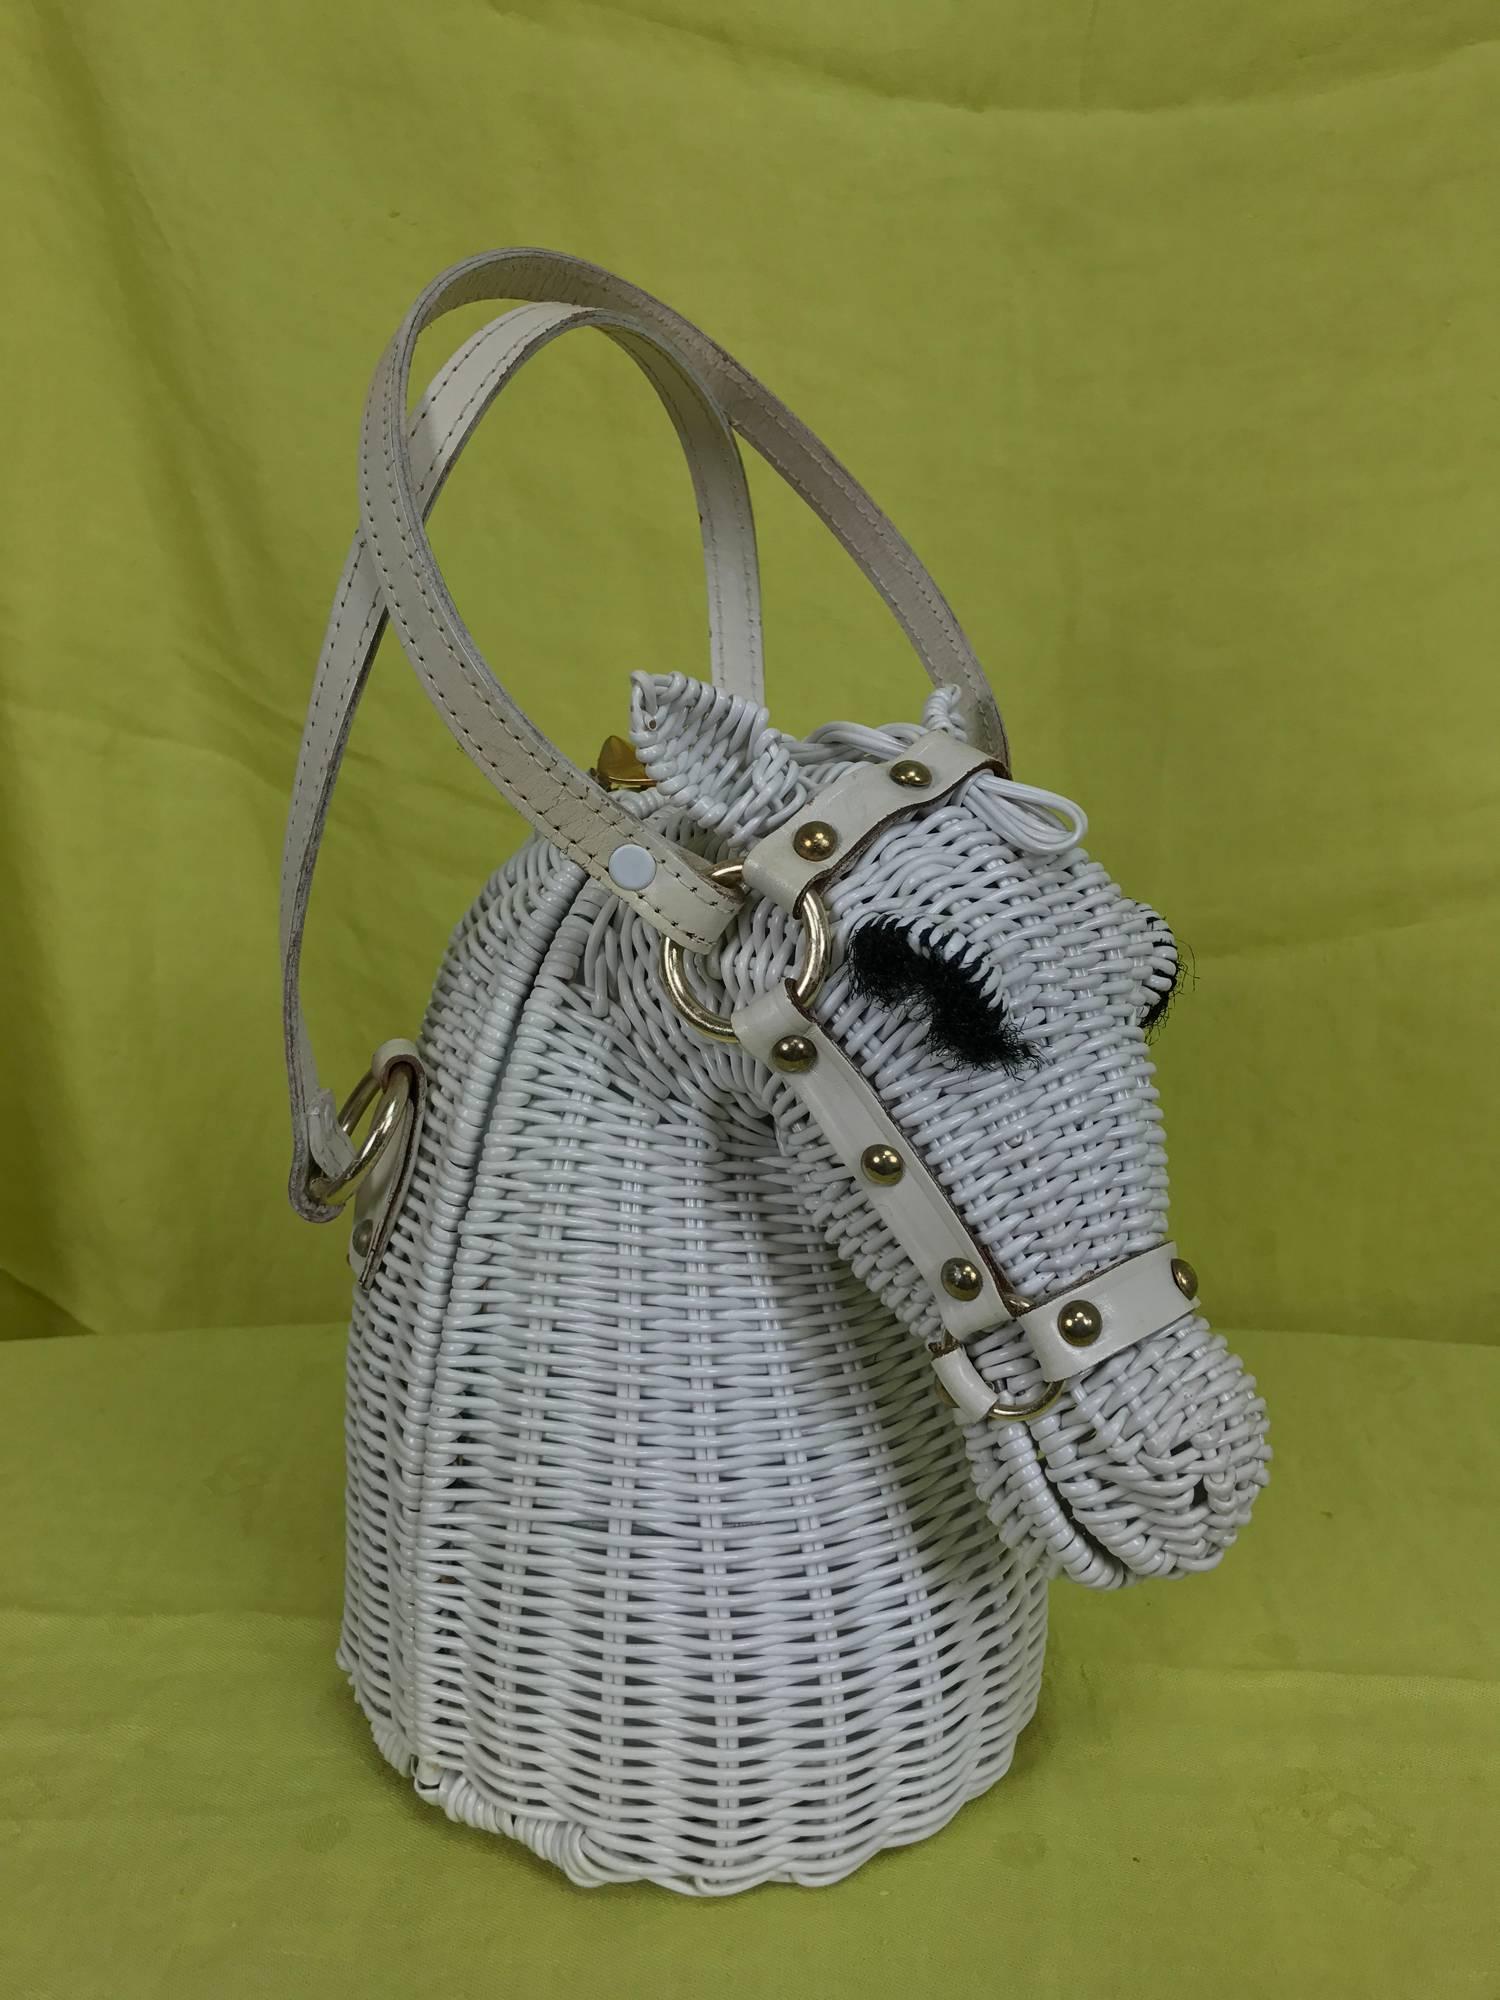 Marcus Brothers of Miami rare white wicker horse head with eyelashes handbag from the early 1960s...White wicker handbag in the shape of a horse head, with stand up ears, a white leather and brass bridle and thick black eyelashes, this is the only